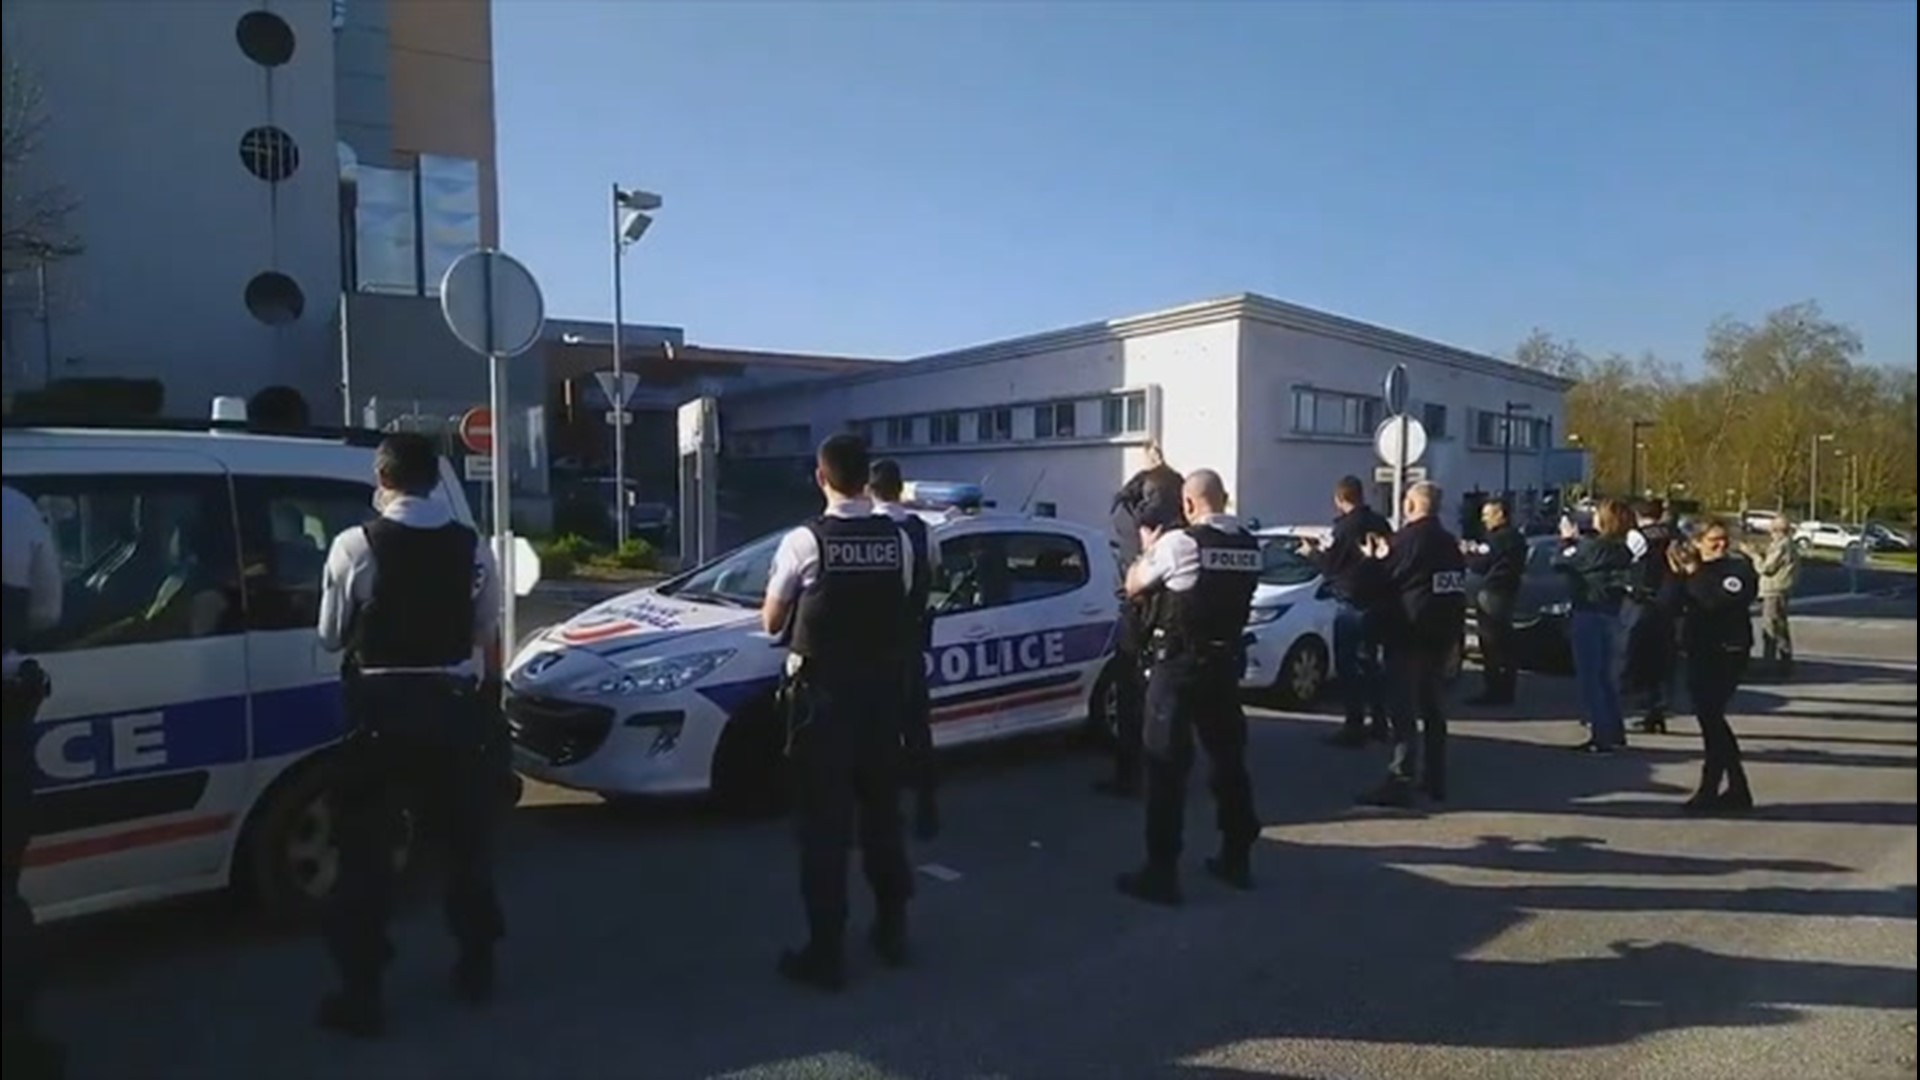 Police cheered on healthcare workers at a hospital in Angouleme, France, on March 30, as the region continues to deal with the COVID-19 pandemic